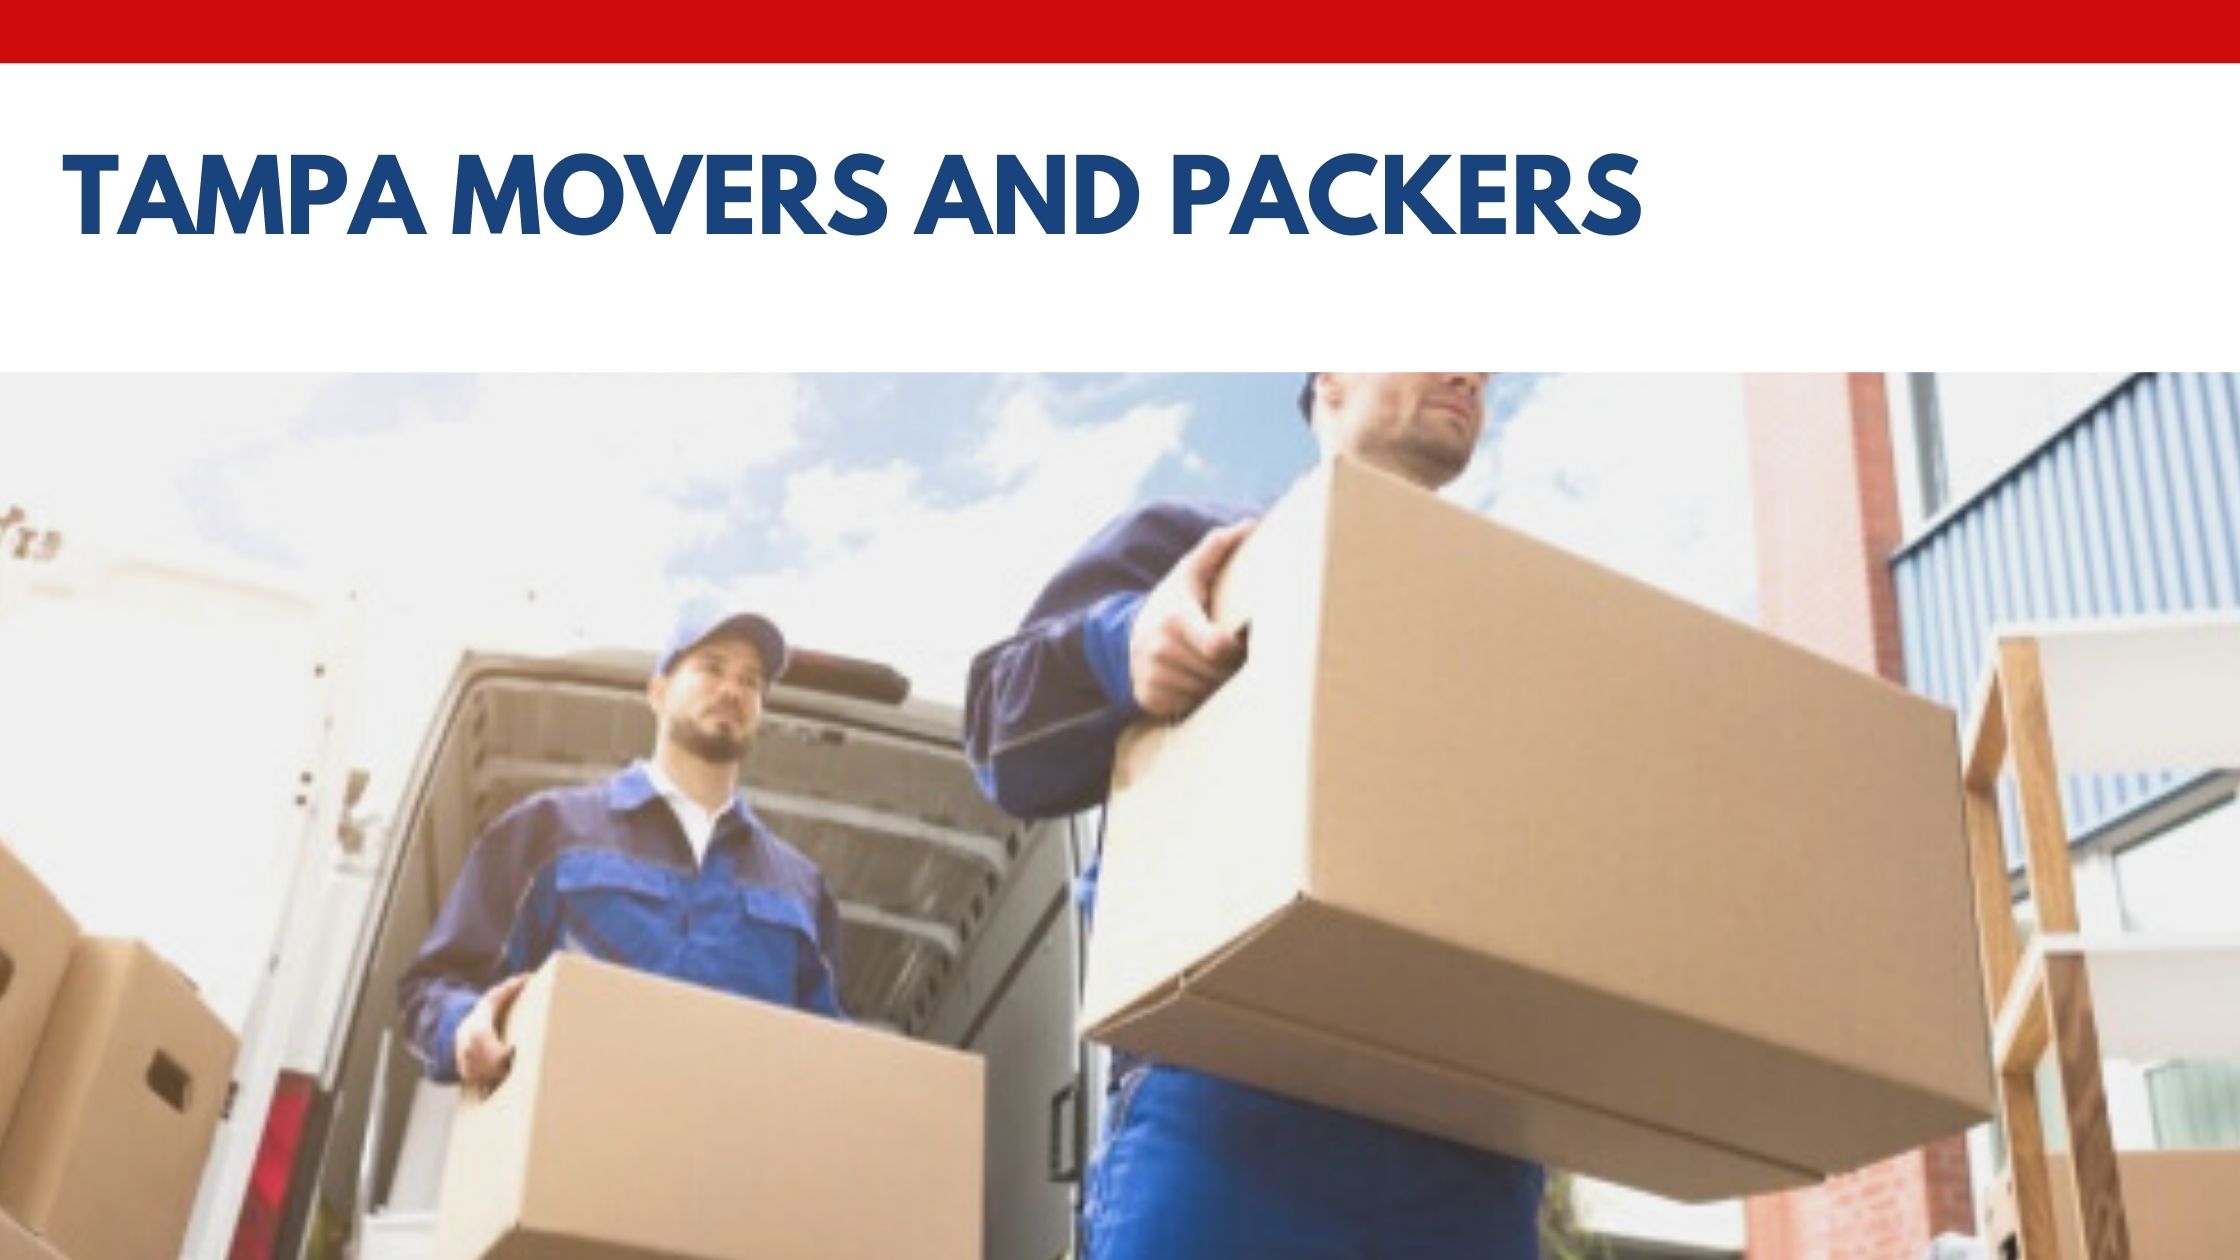 Tampa Movers and Packers